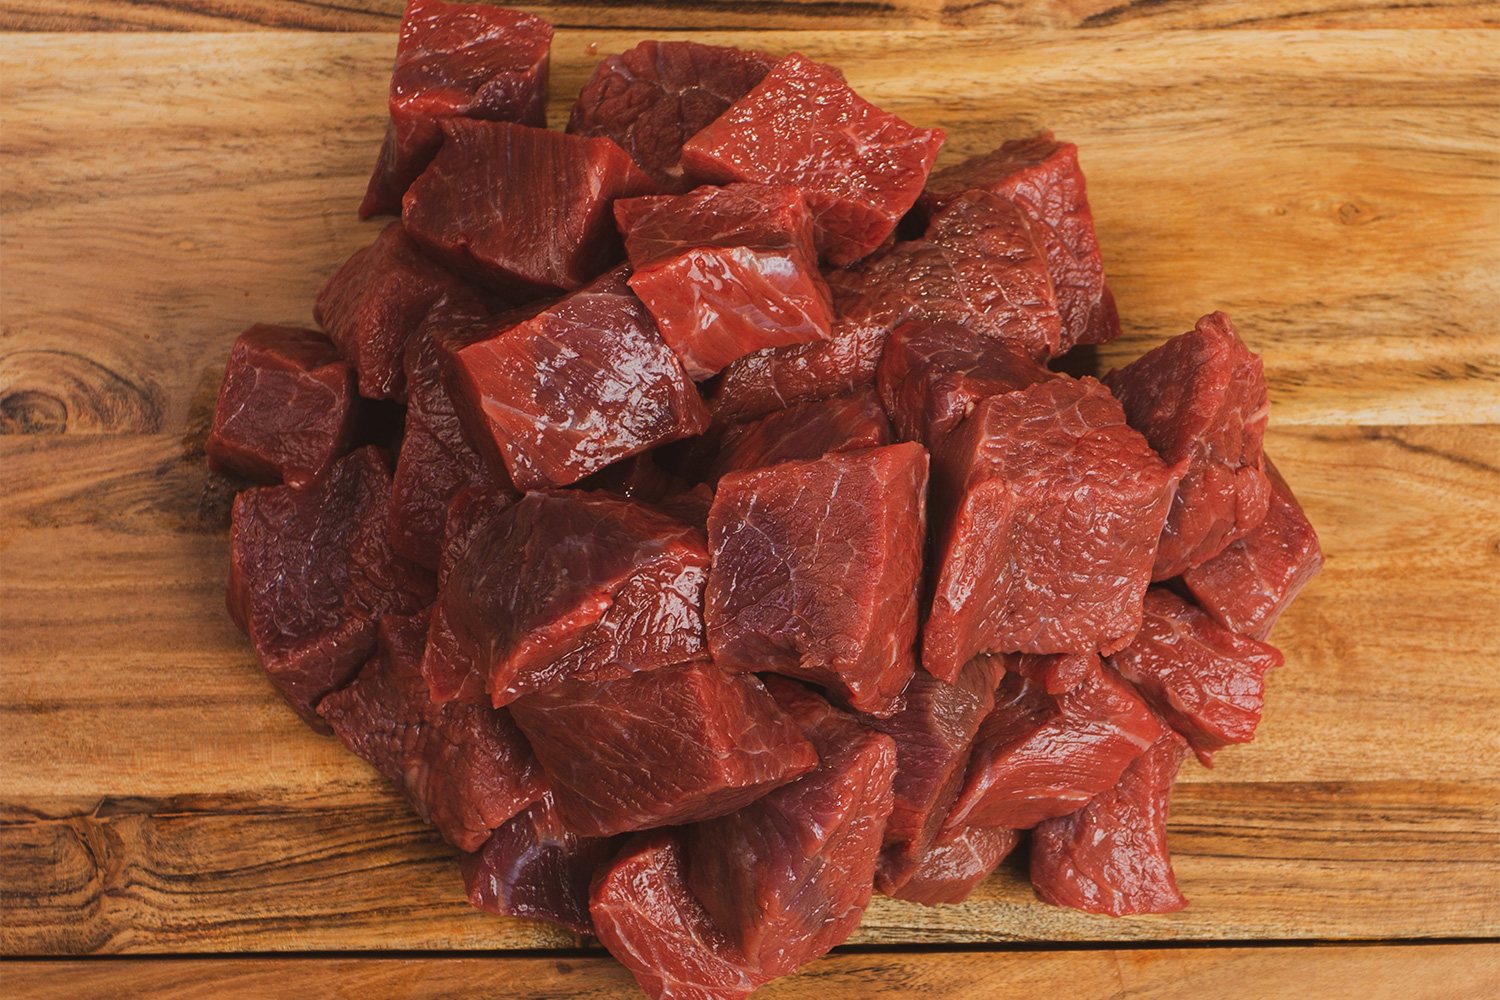 Assortment of Raw Meat for Dogs - Beef, Goat, Lamb, and Offal - Bulk Buy 10kg.